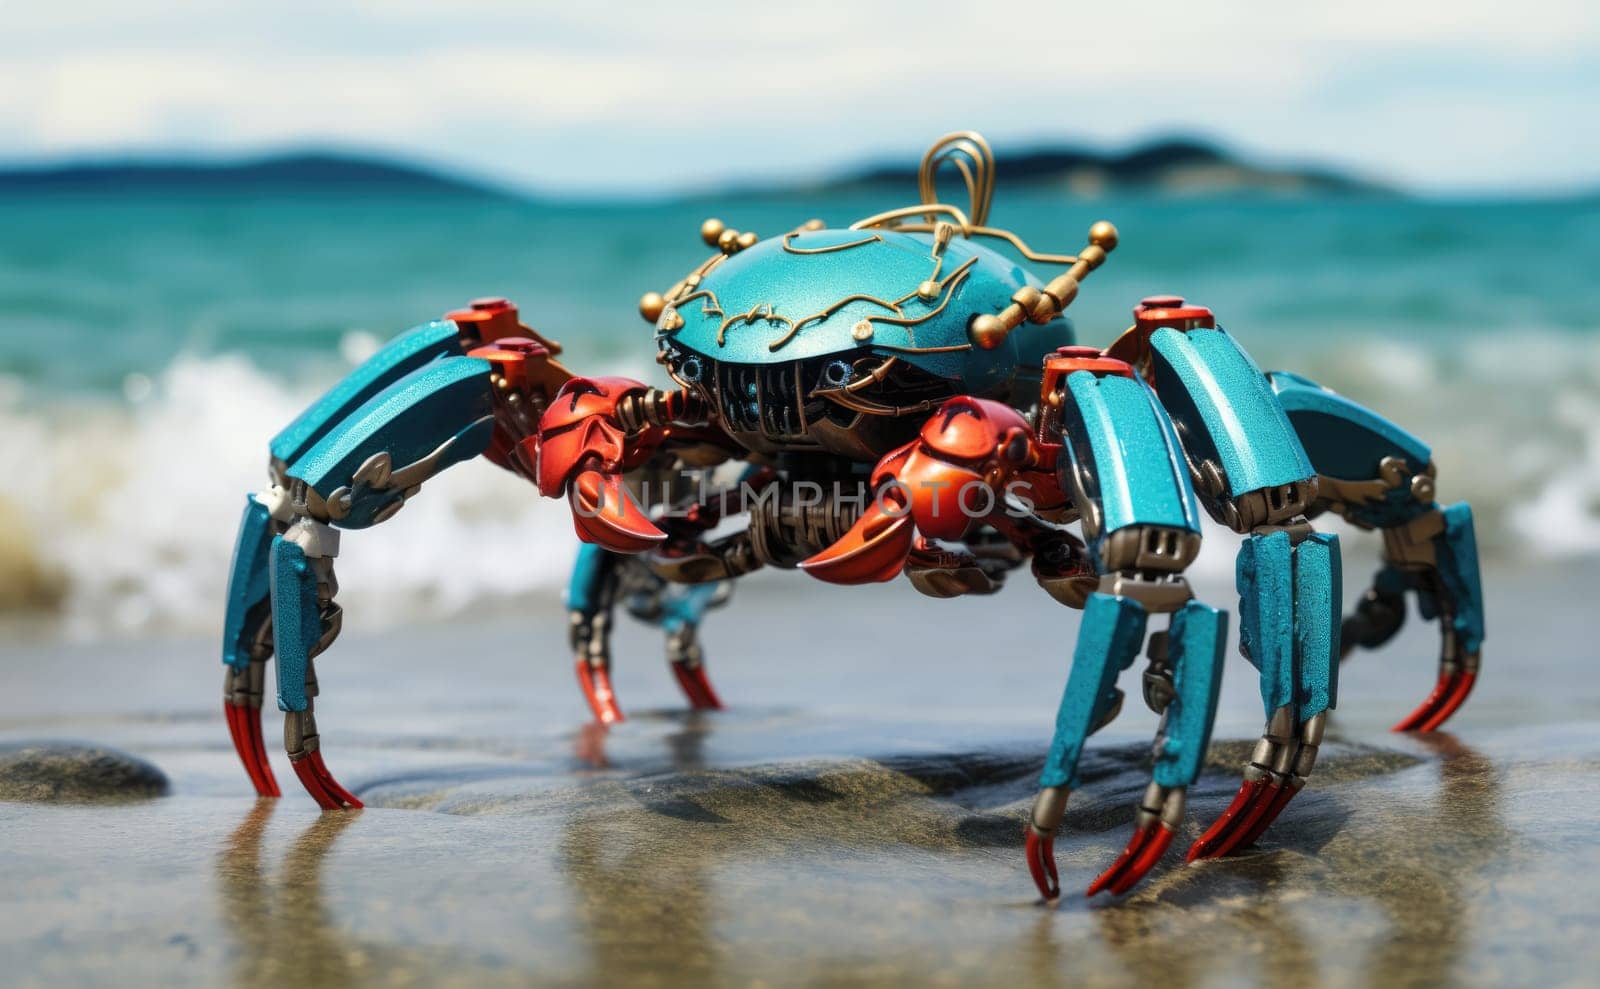 Robot crab on the seashore among the rocks. Hidden among the rocks, a cybernetic crab monitors the state of the seashore, helping scientists study ecosystems.